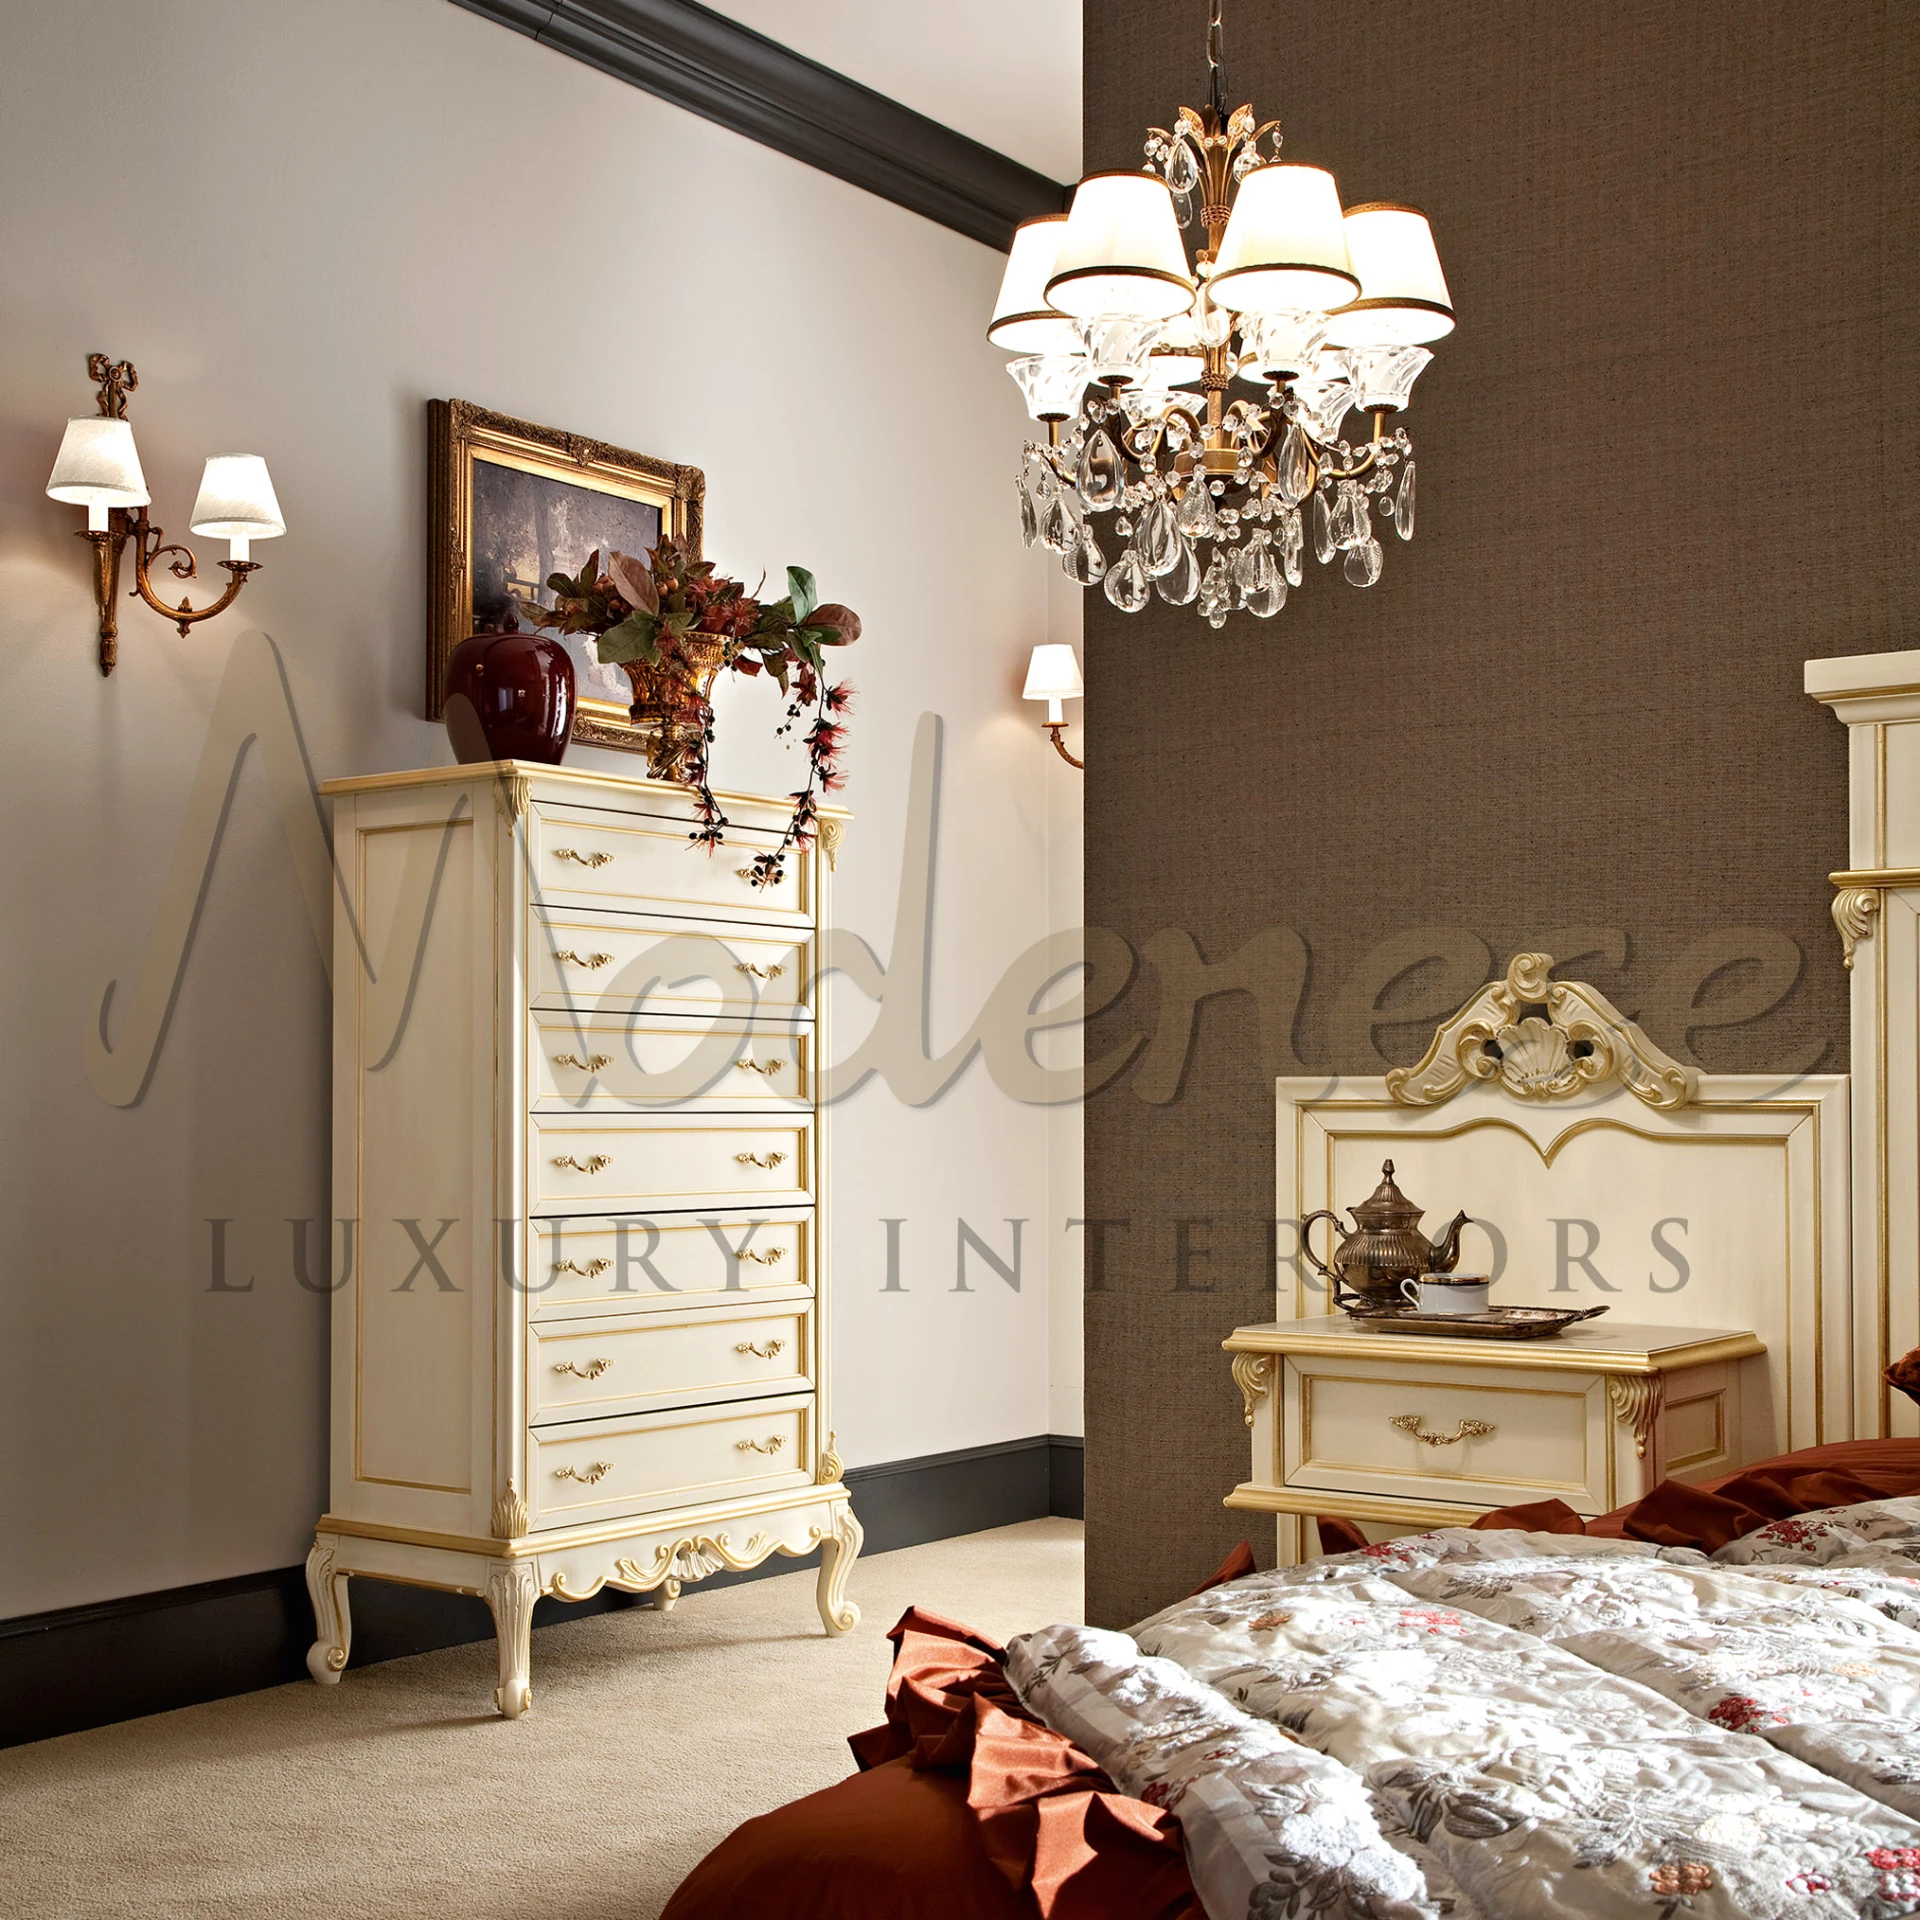 A luxurious bedroom interior with elegant furniture.